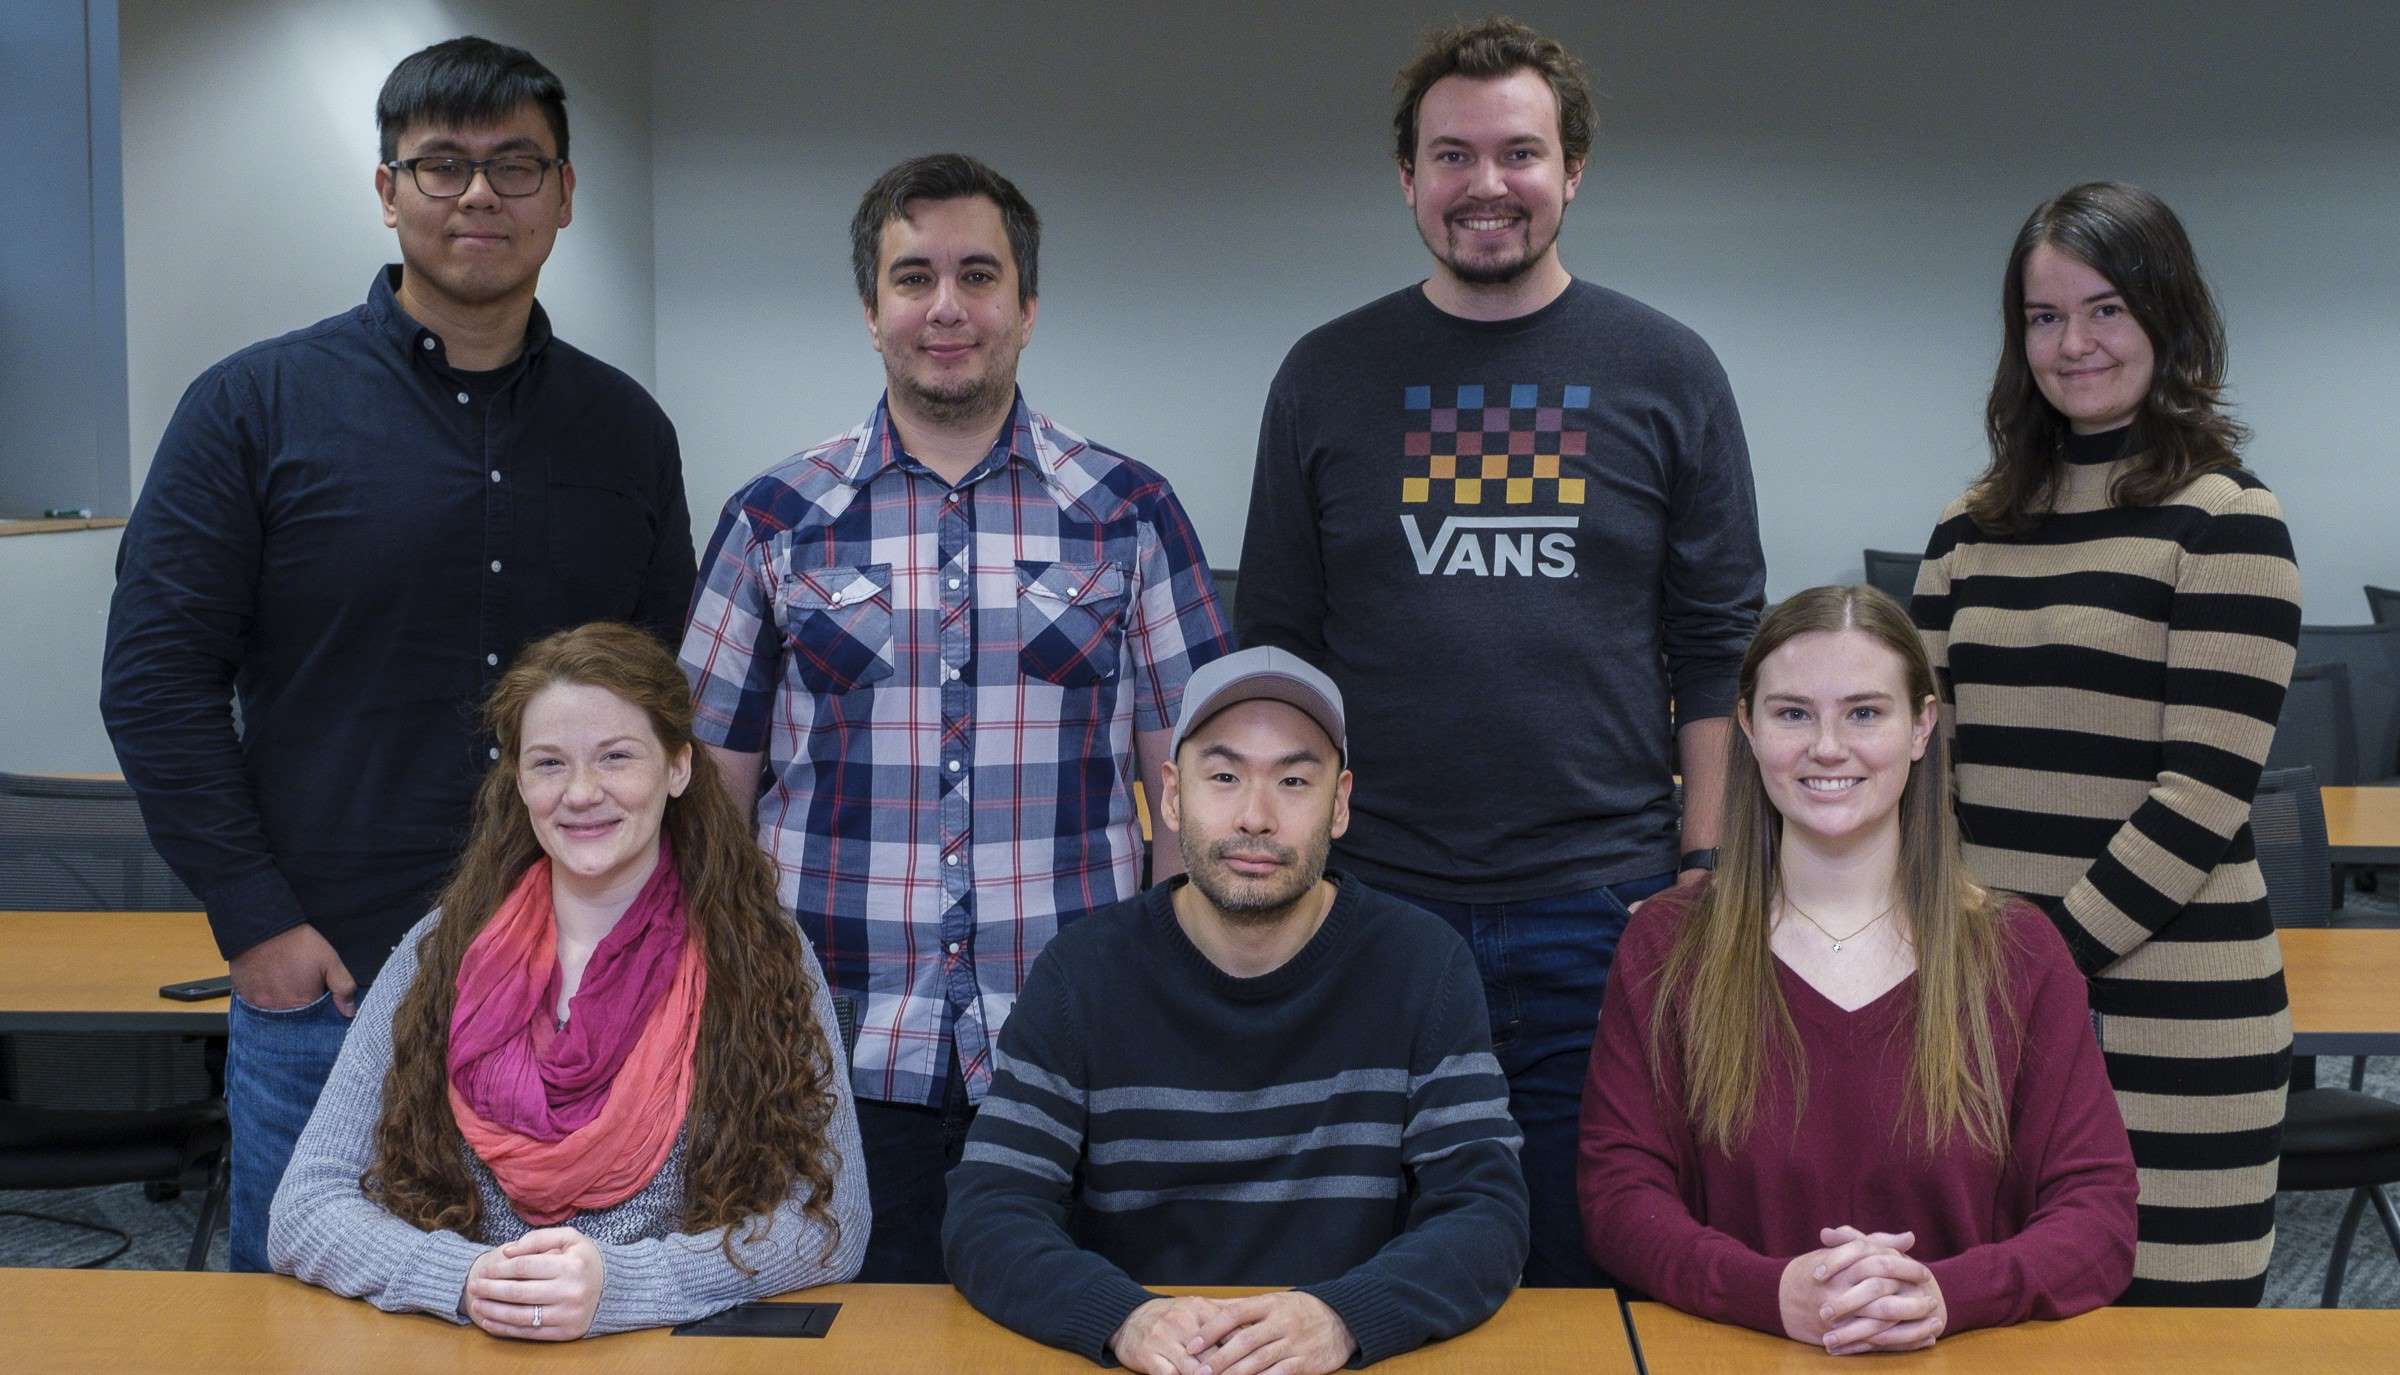 The seven current graduate students in the Cognition & Cognitive Neuroscience graduate program face the camera and smile. They are in a conference room and three sit at the tables and four stand directly behind them.